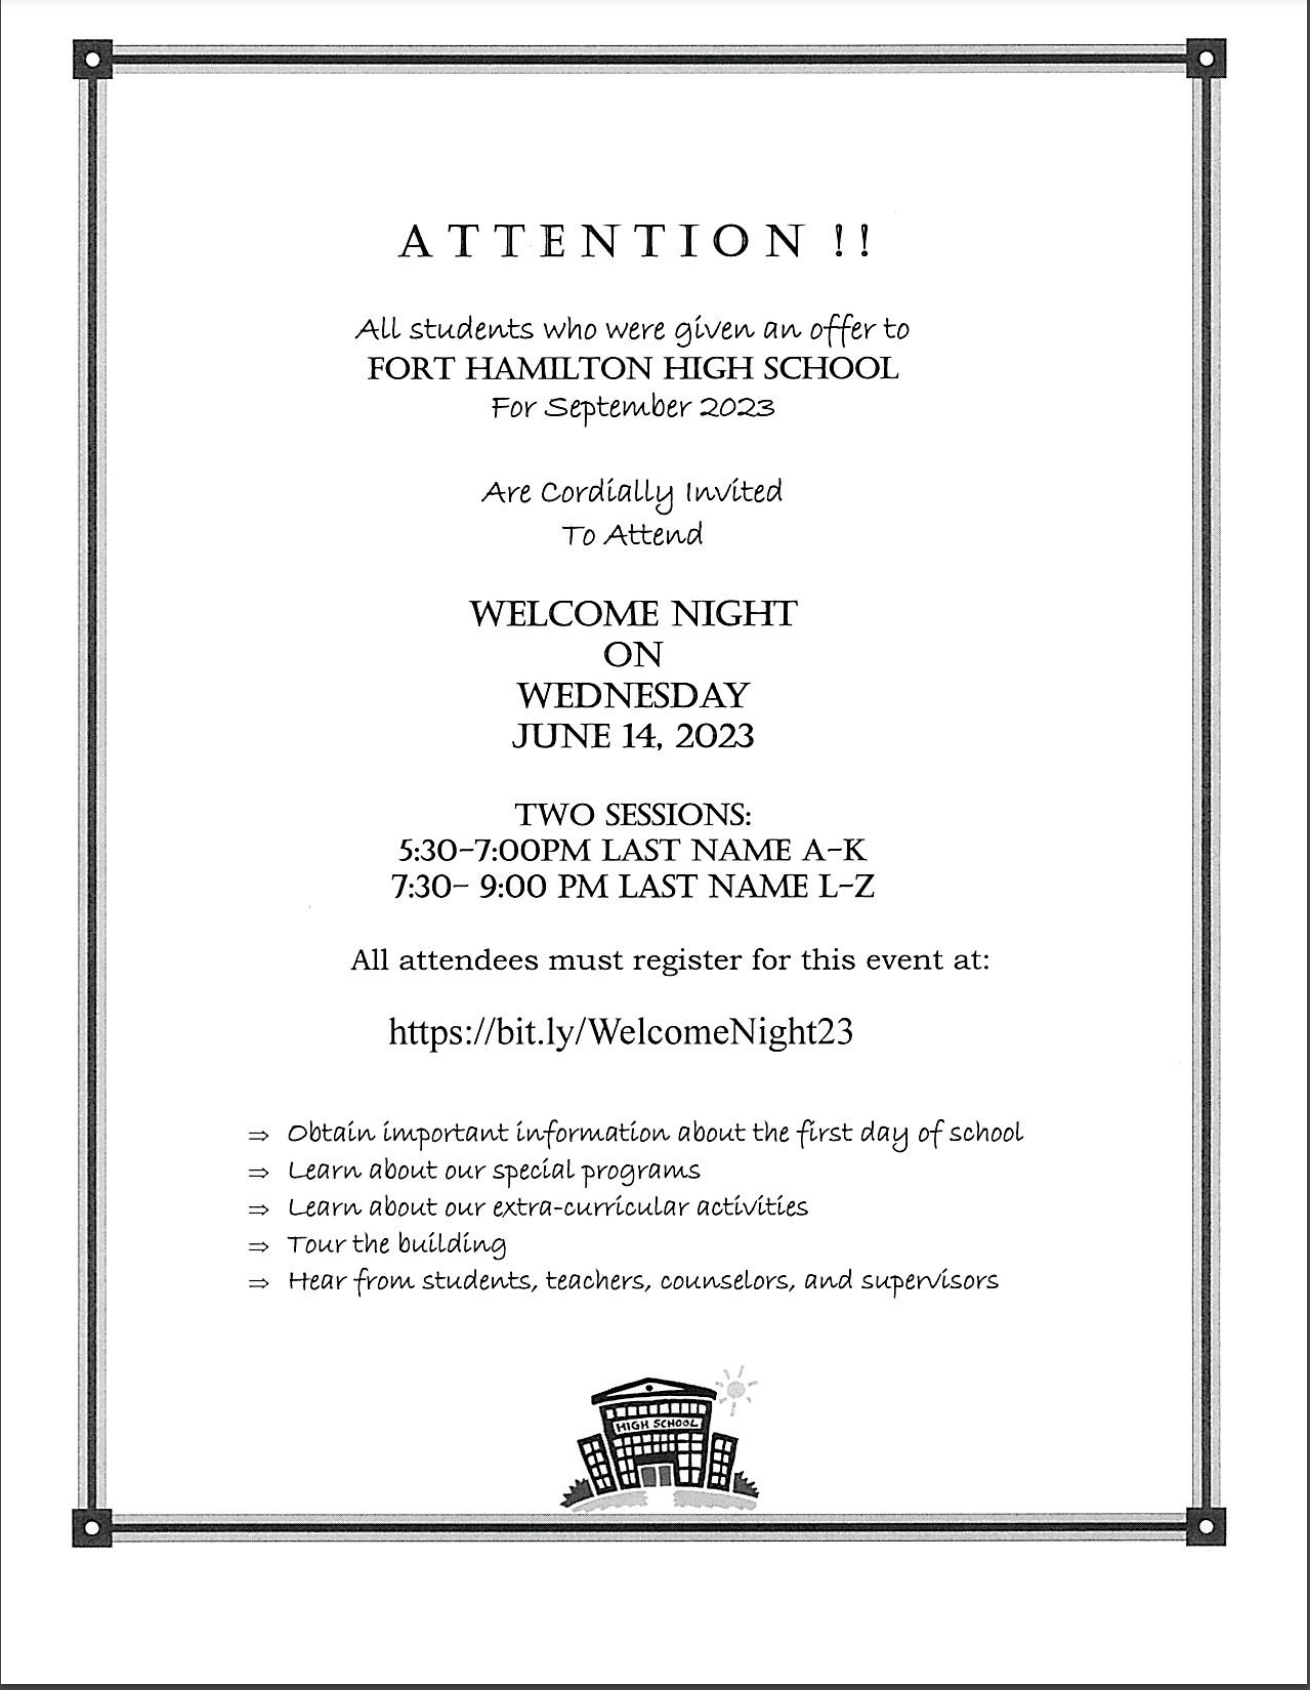 Welcome night flyer